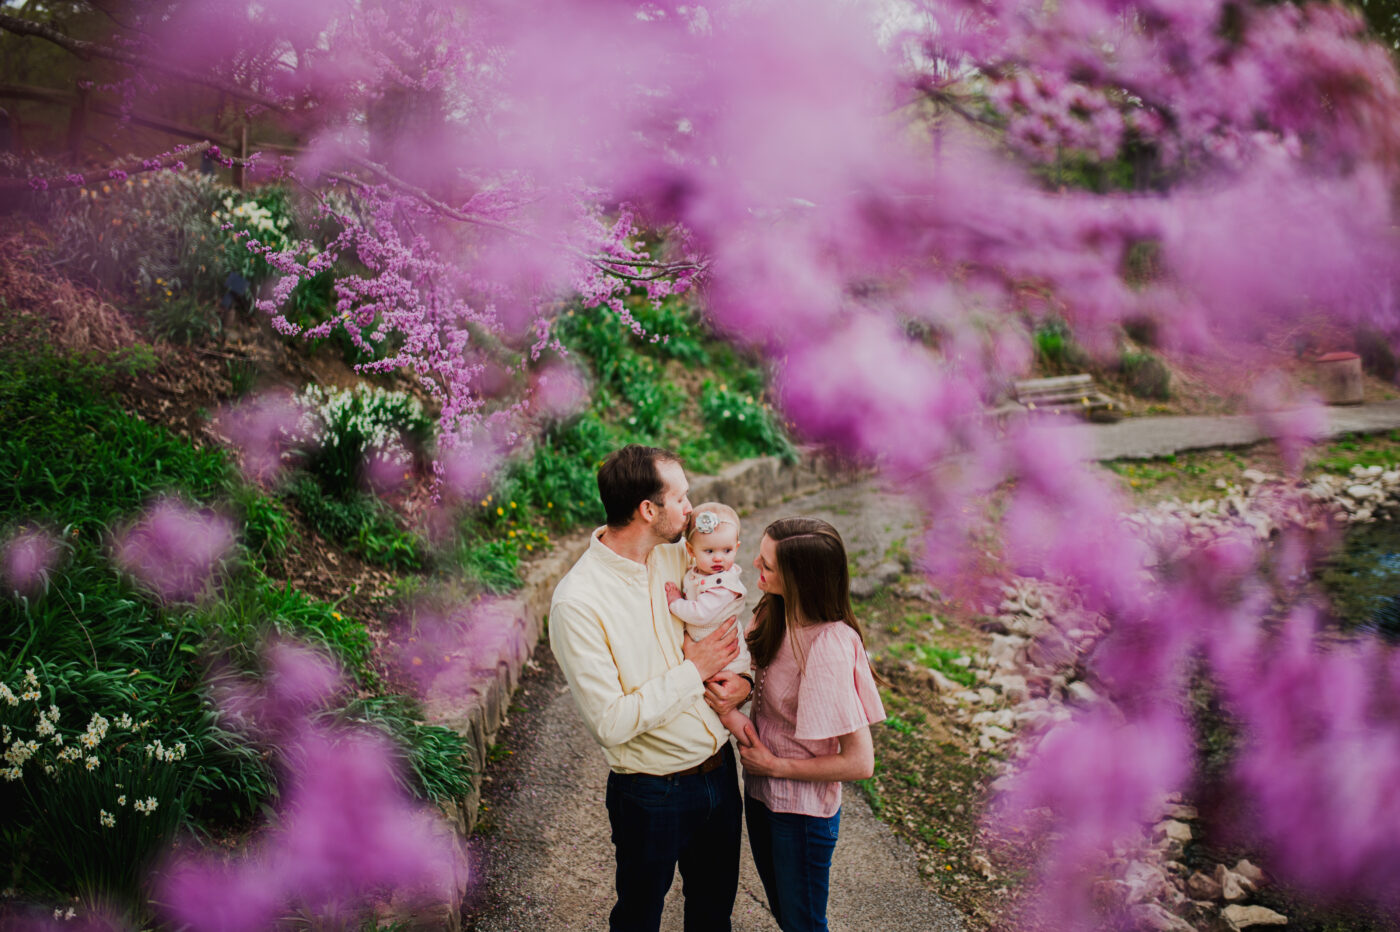 The Ashley family has a quiet moment underneath the cherry blossom trees at Coonskin Park in Charleston, WV.